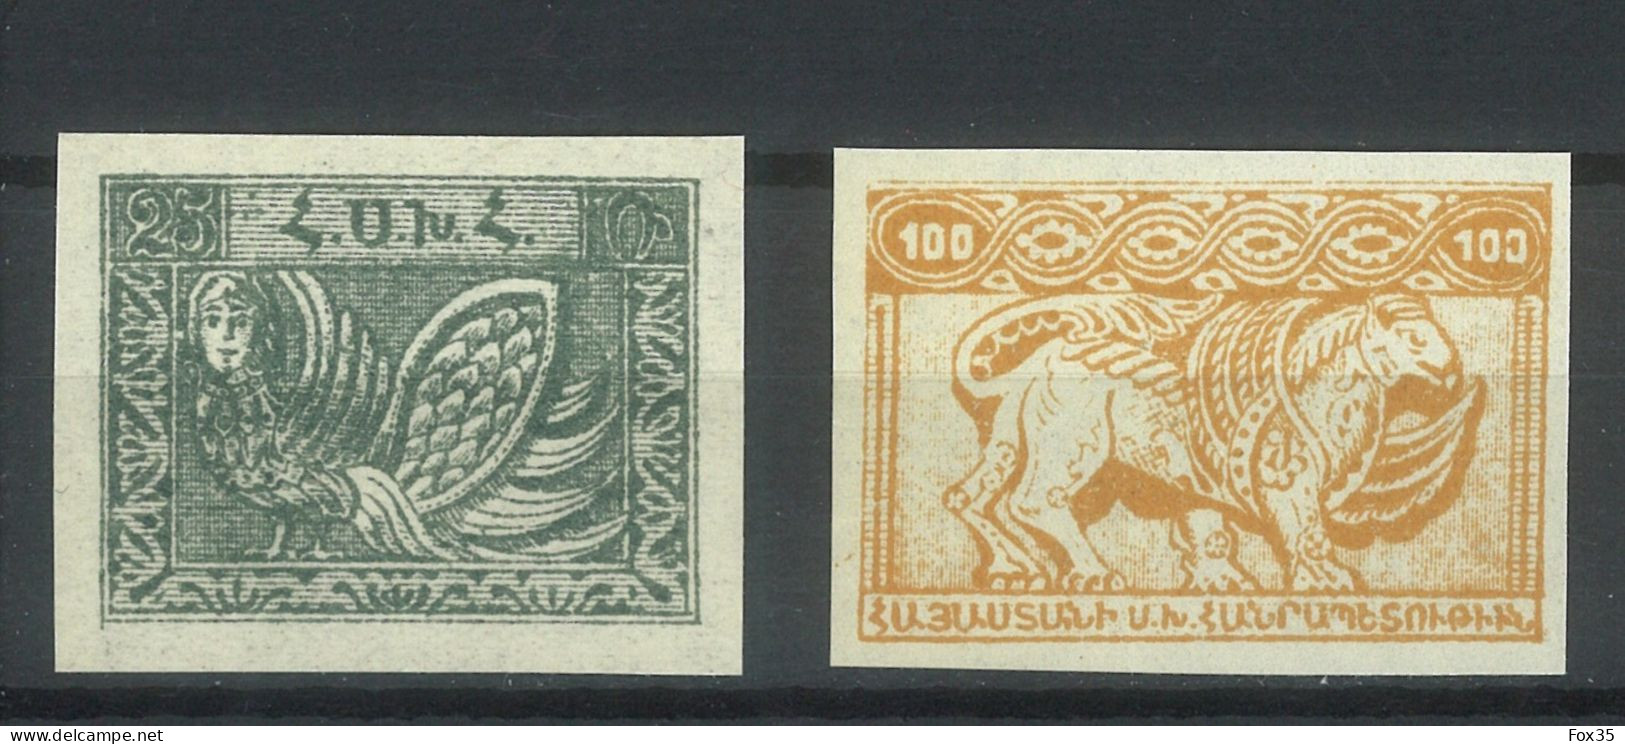 Armenia 1919-1923, 1921 First Constantinople Pictorials Issue set, imperforated, sold as genuine, CV 57€